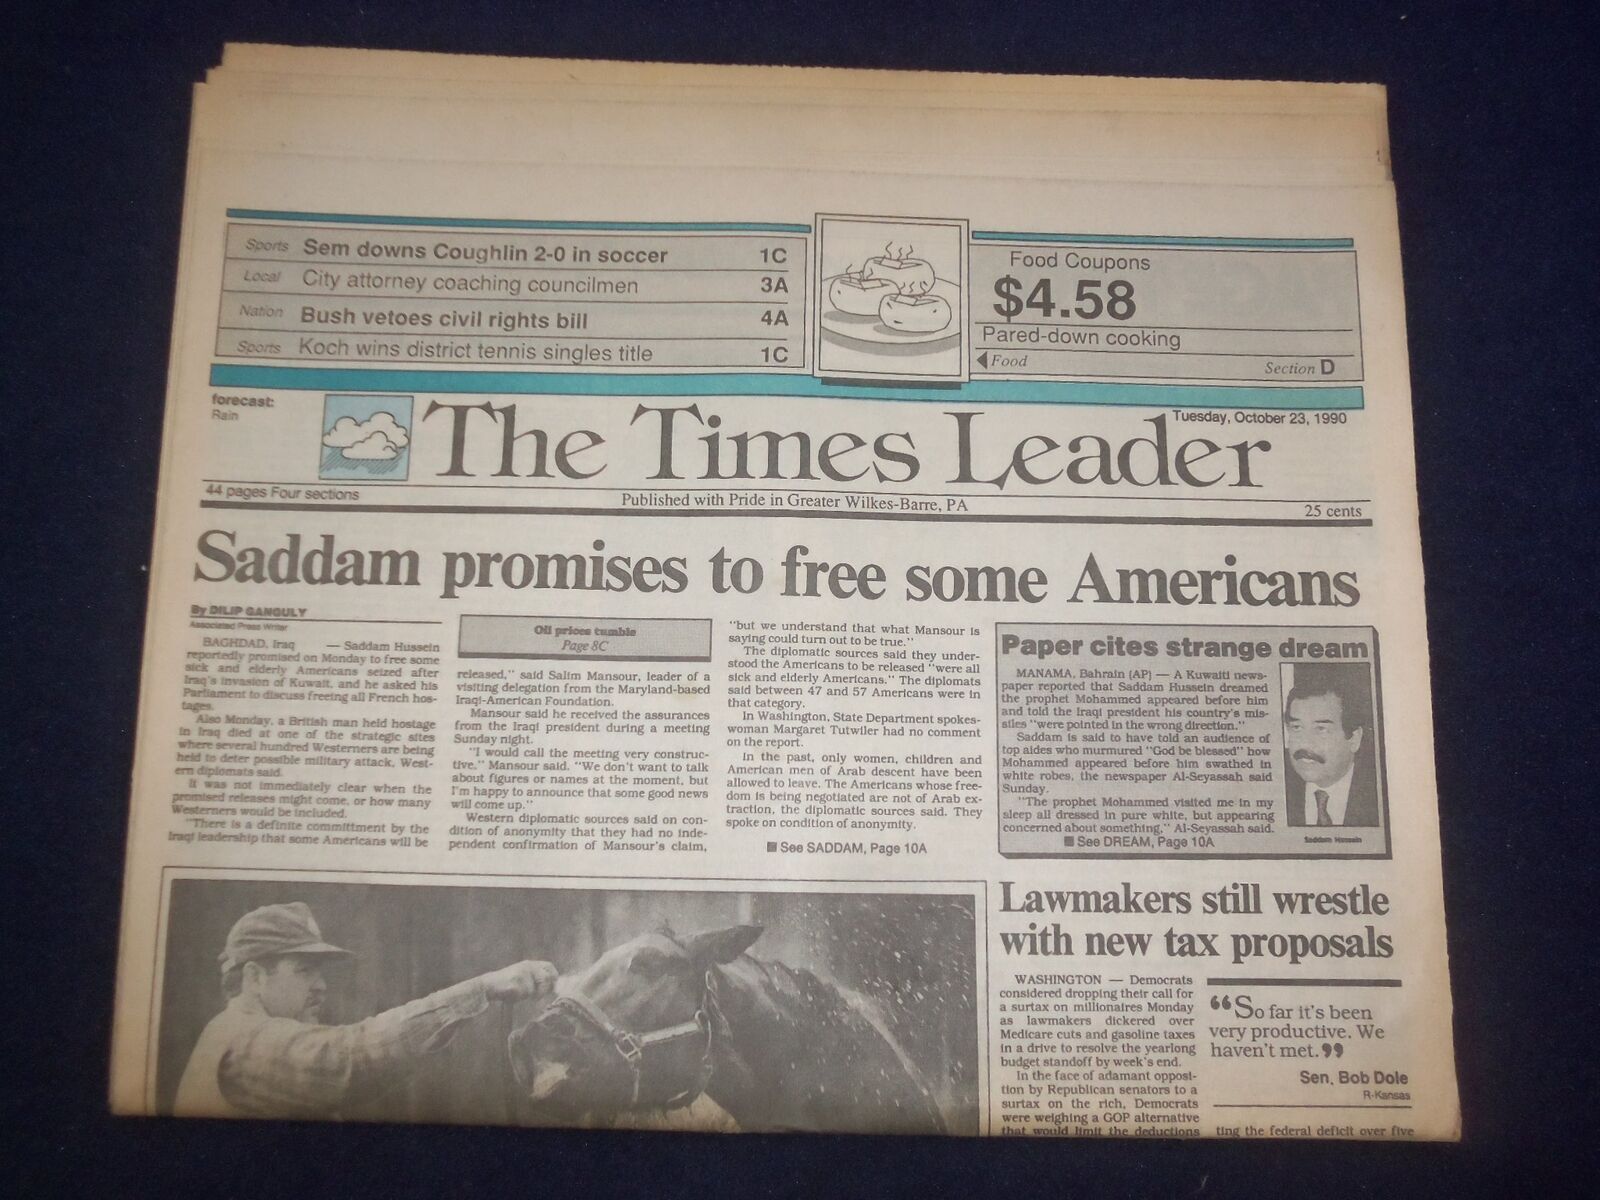 1990 OCT 23 WILKES-BARRE TIMES LEADER-SADDAM PROMISES TO FREE AMERICANS- NP 8088